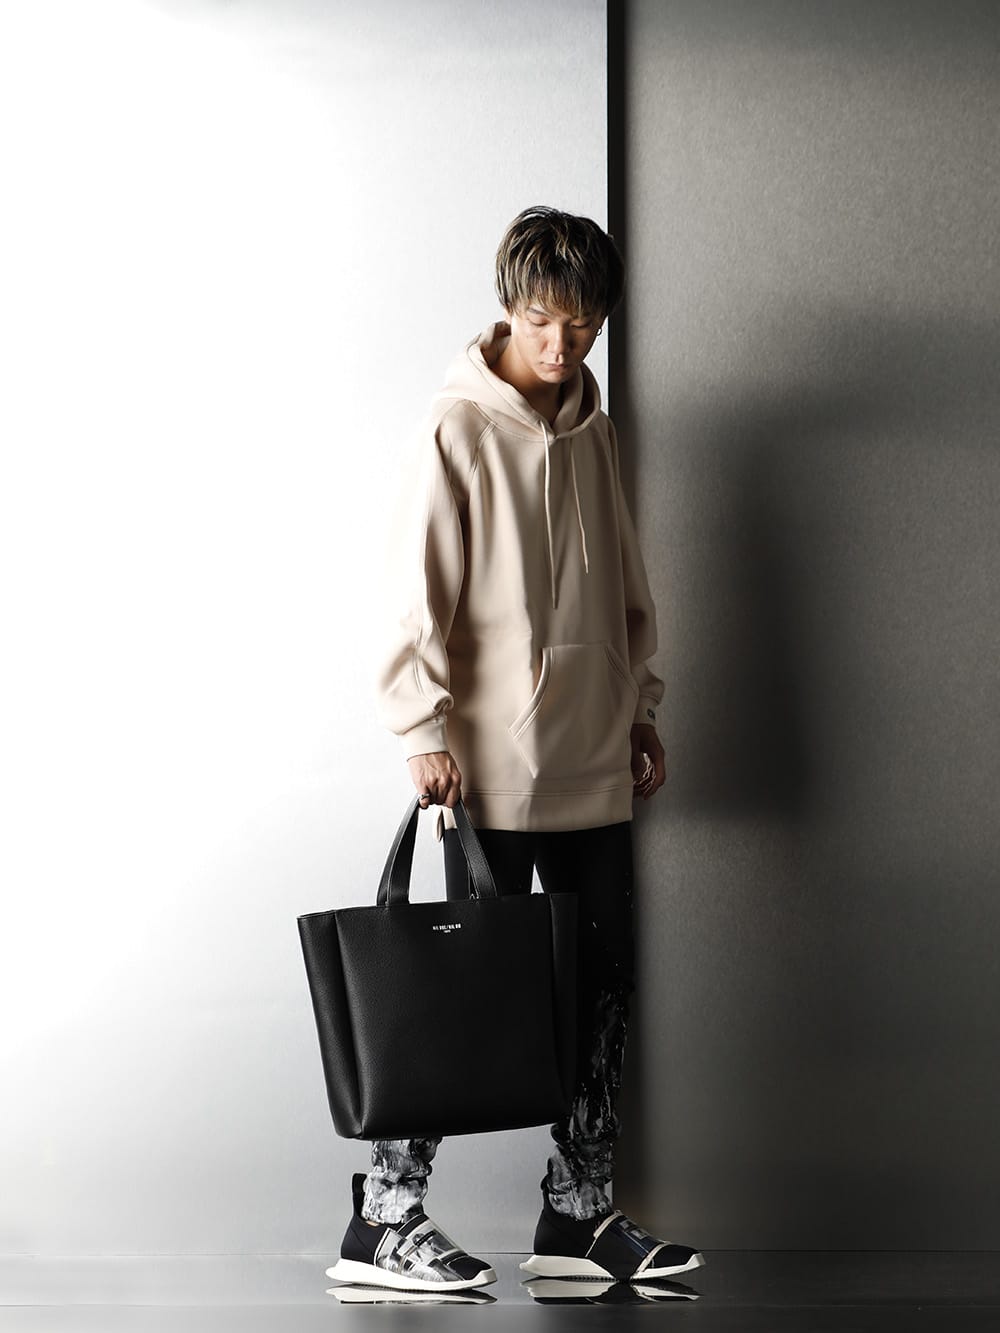 NIL DUE / NIL UN TOKYO EMBROIDERY Hoodie Styling - FASCINATE BLOG